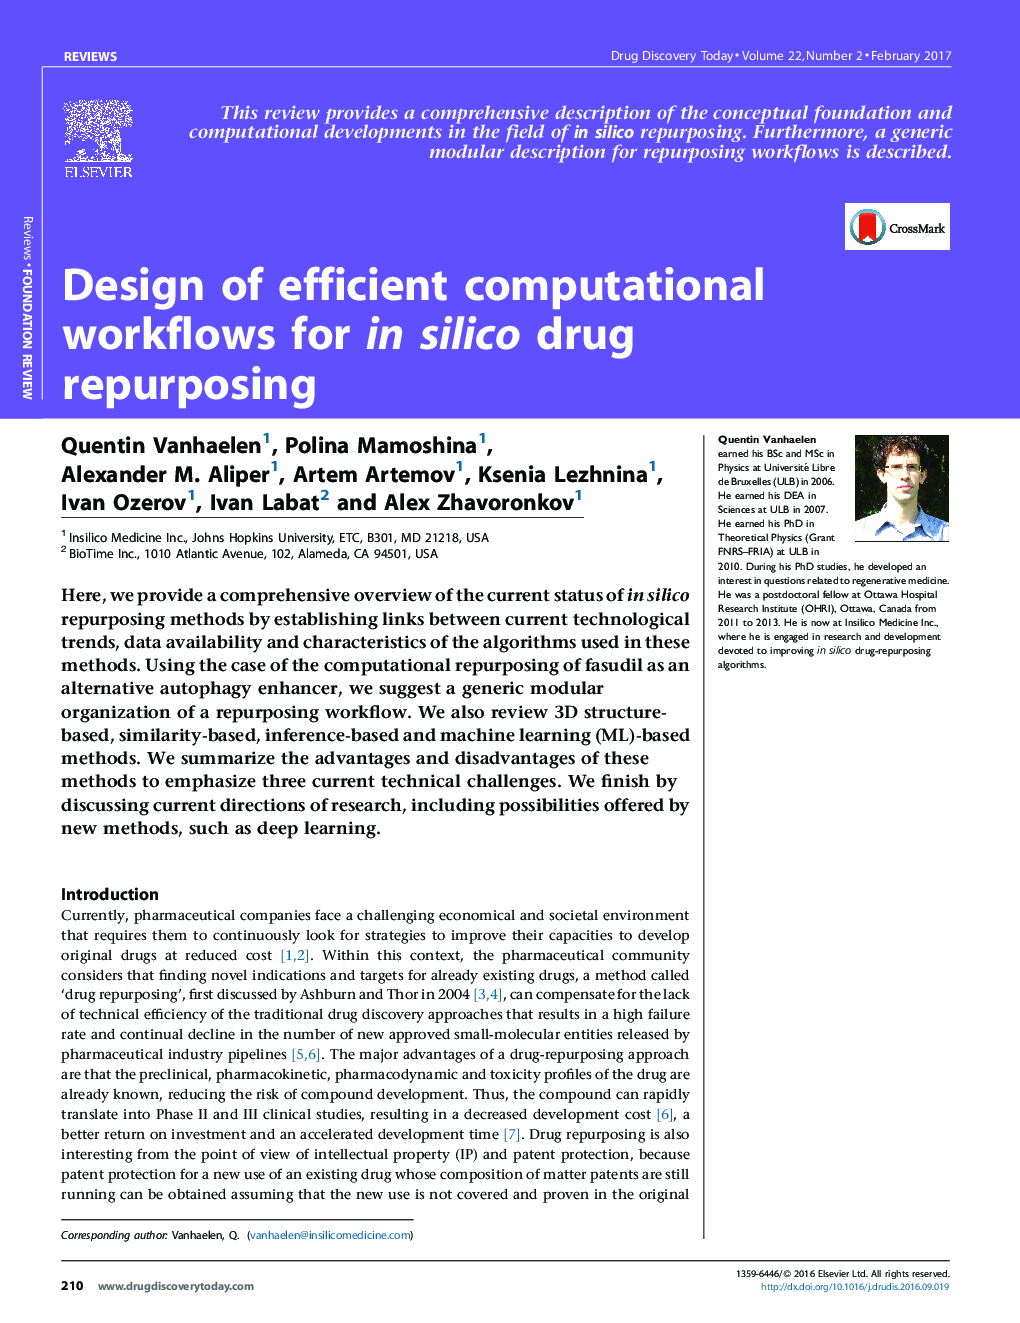 ReviewFoundationDesign of efficient computational workflows for in silico drug repurposing